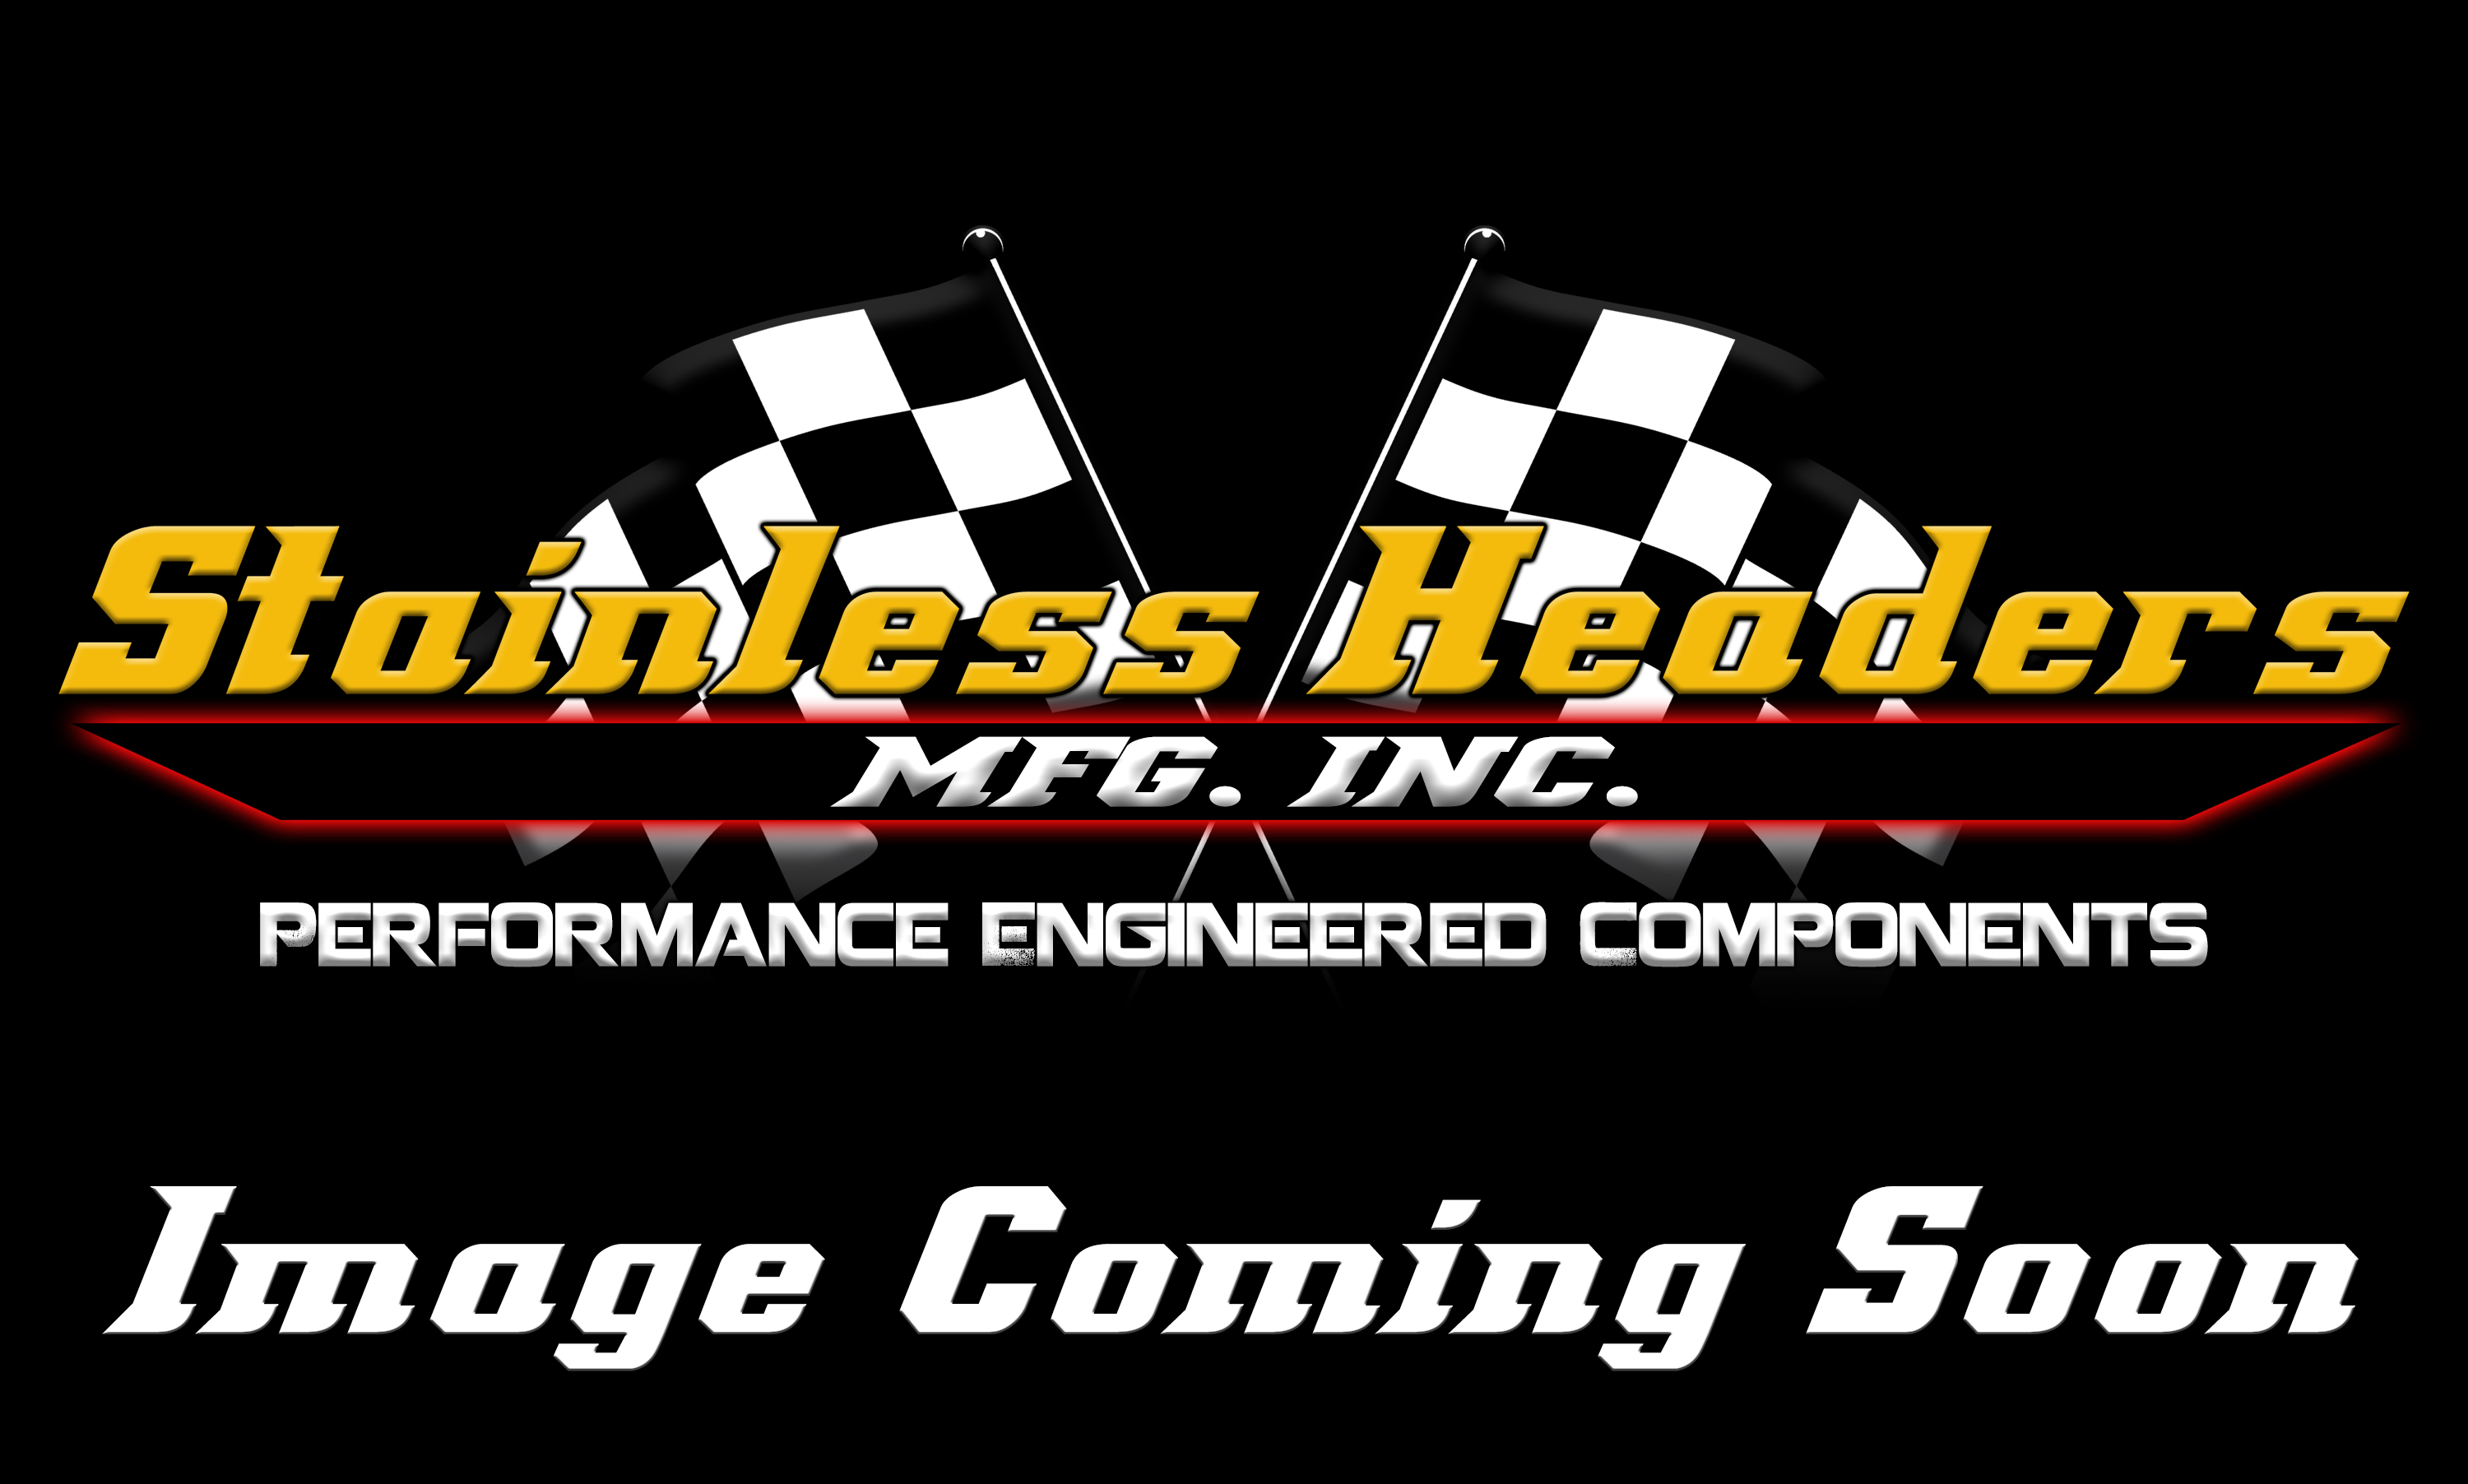 Stainless Headers - 2 3/8" Primary 8 into 1 Performance Merge Collector-16ga 321ss - Image 1